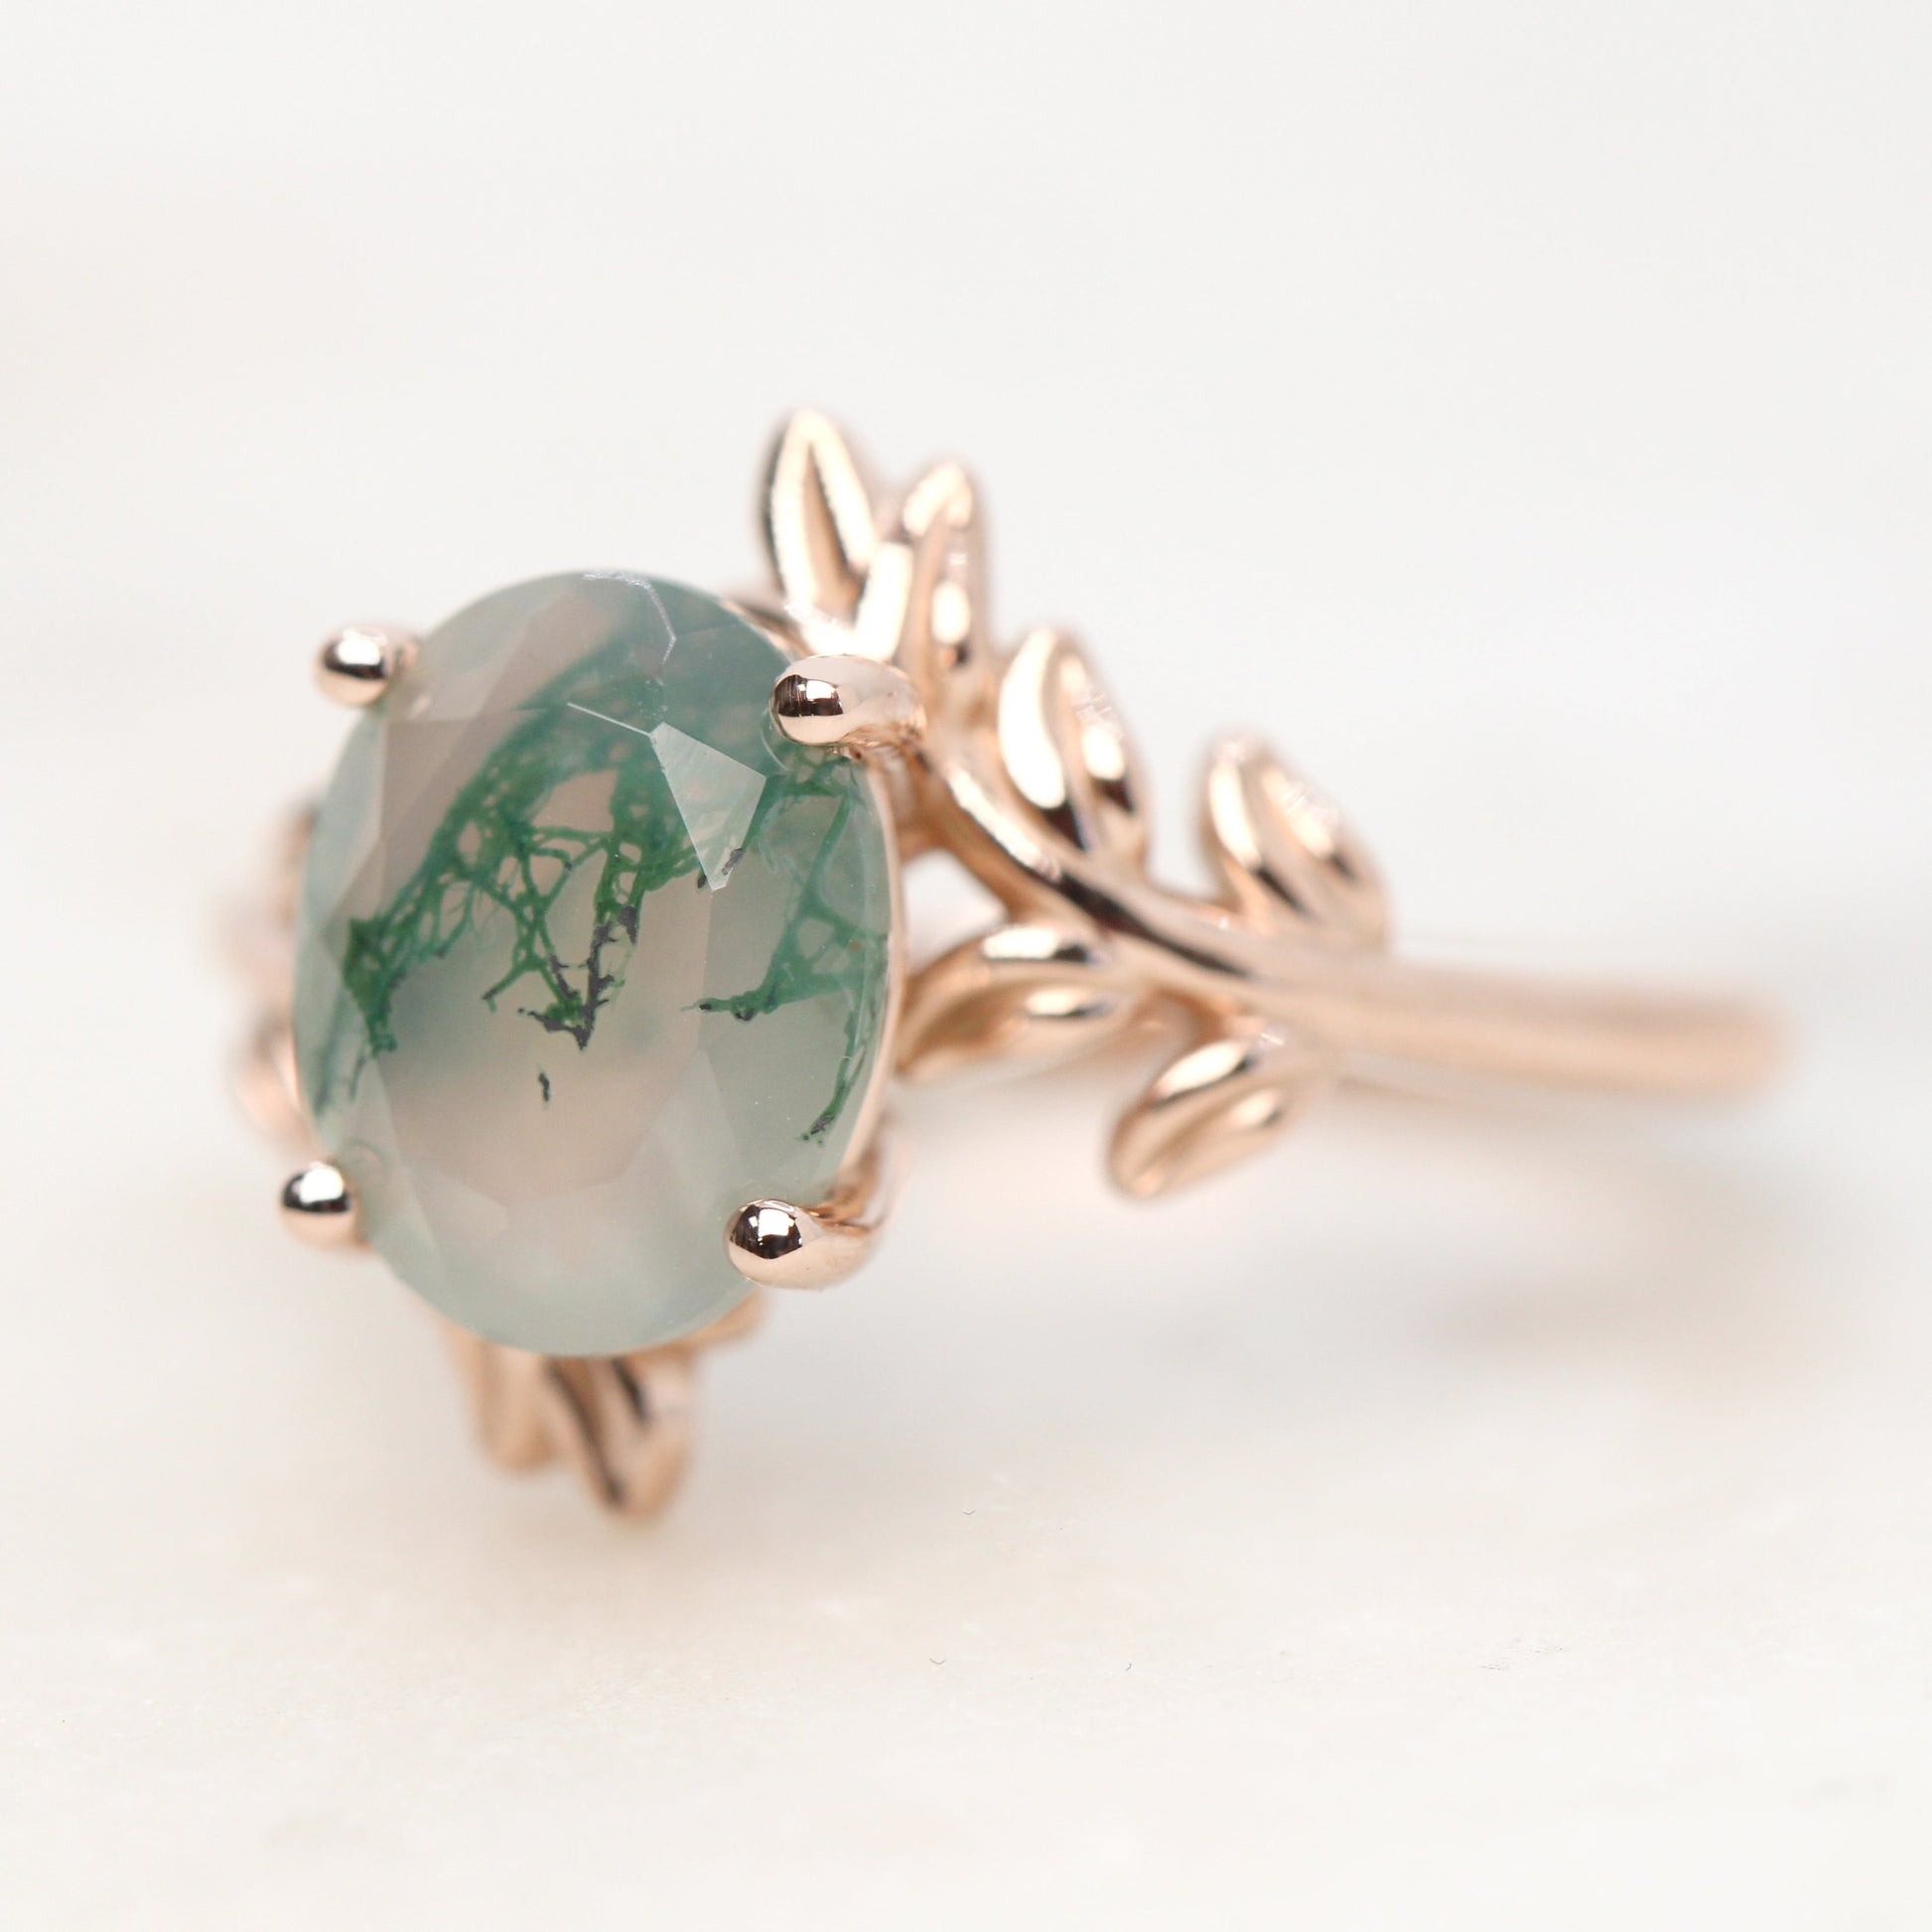 Sara Ring with a 2.50 Carat Oval Moss Agate in 14k Rose Gold - Ready to Size and Ship - Midwinter Co. Alternative Bridal Rings and Modern Fine Jewelry